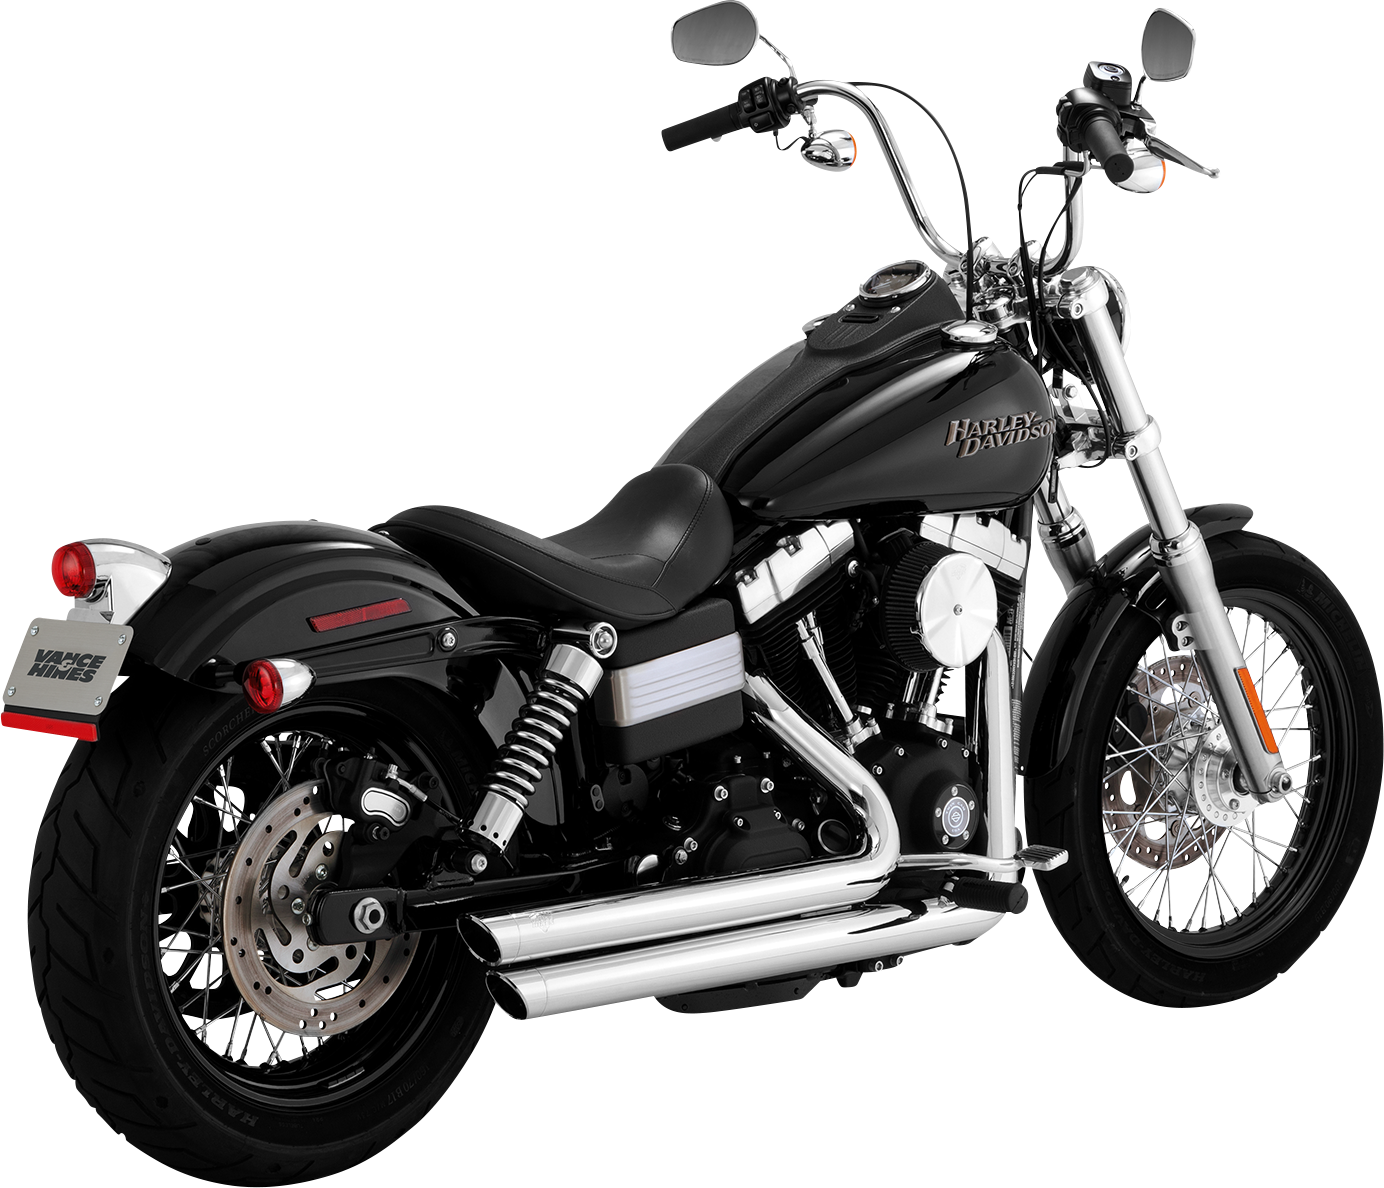 VANCE & HINES Big Shots Staggered Exhaust System - Chrome 17338